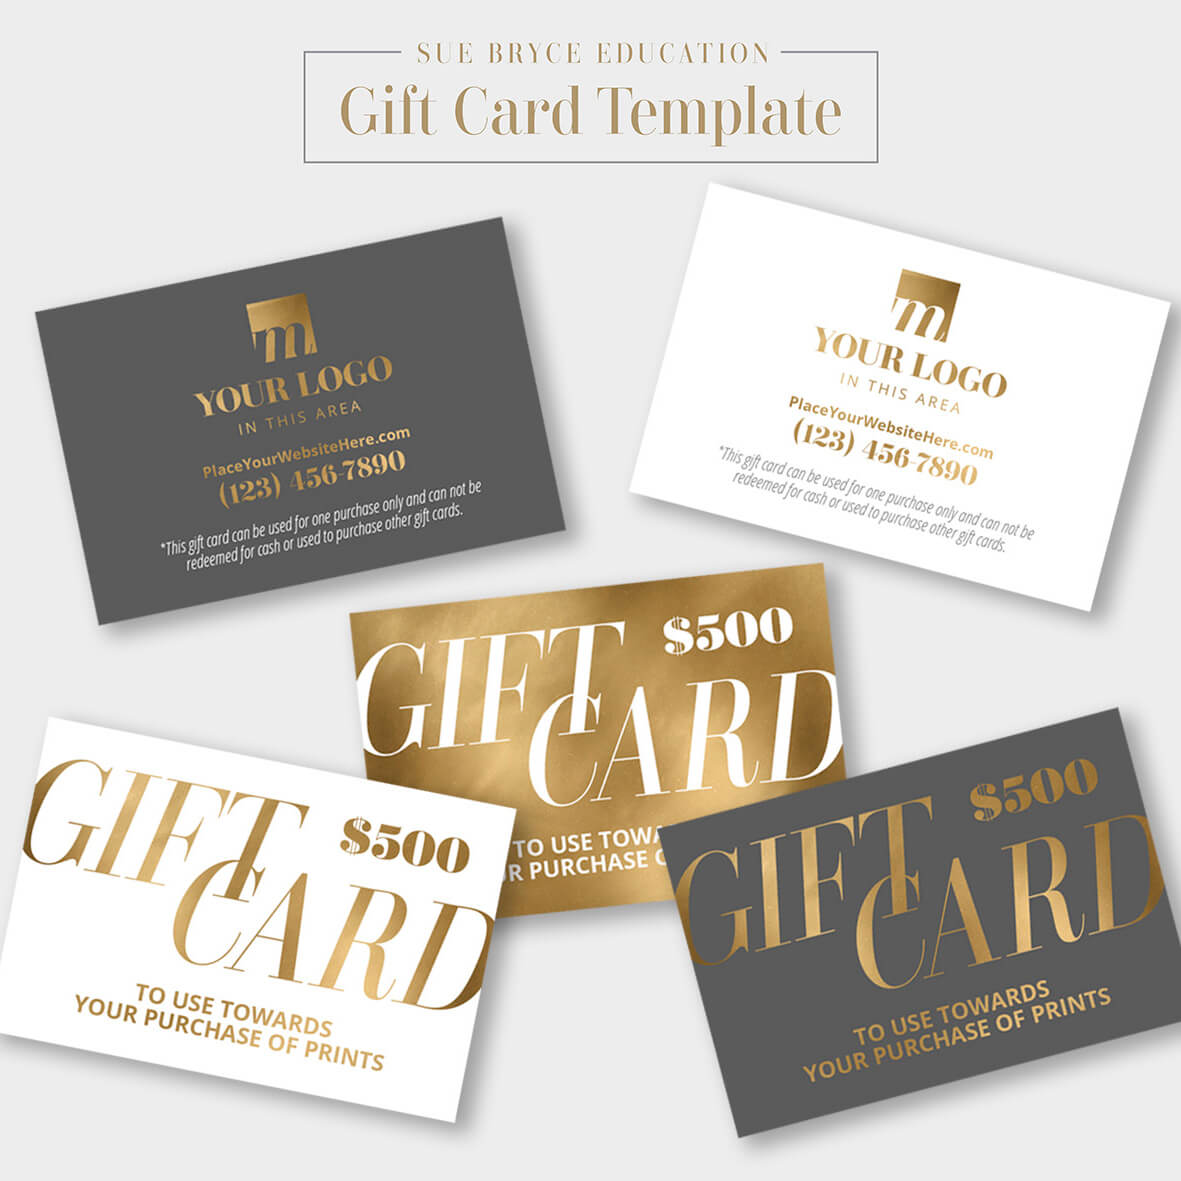 Gift Certificate Templates Indesign Illustrator Gift Coupon Throughout Gift Card Template Illustrator